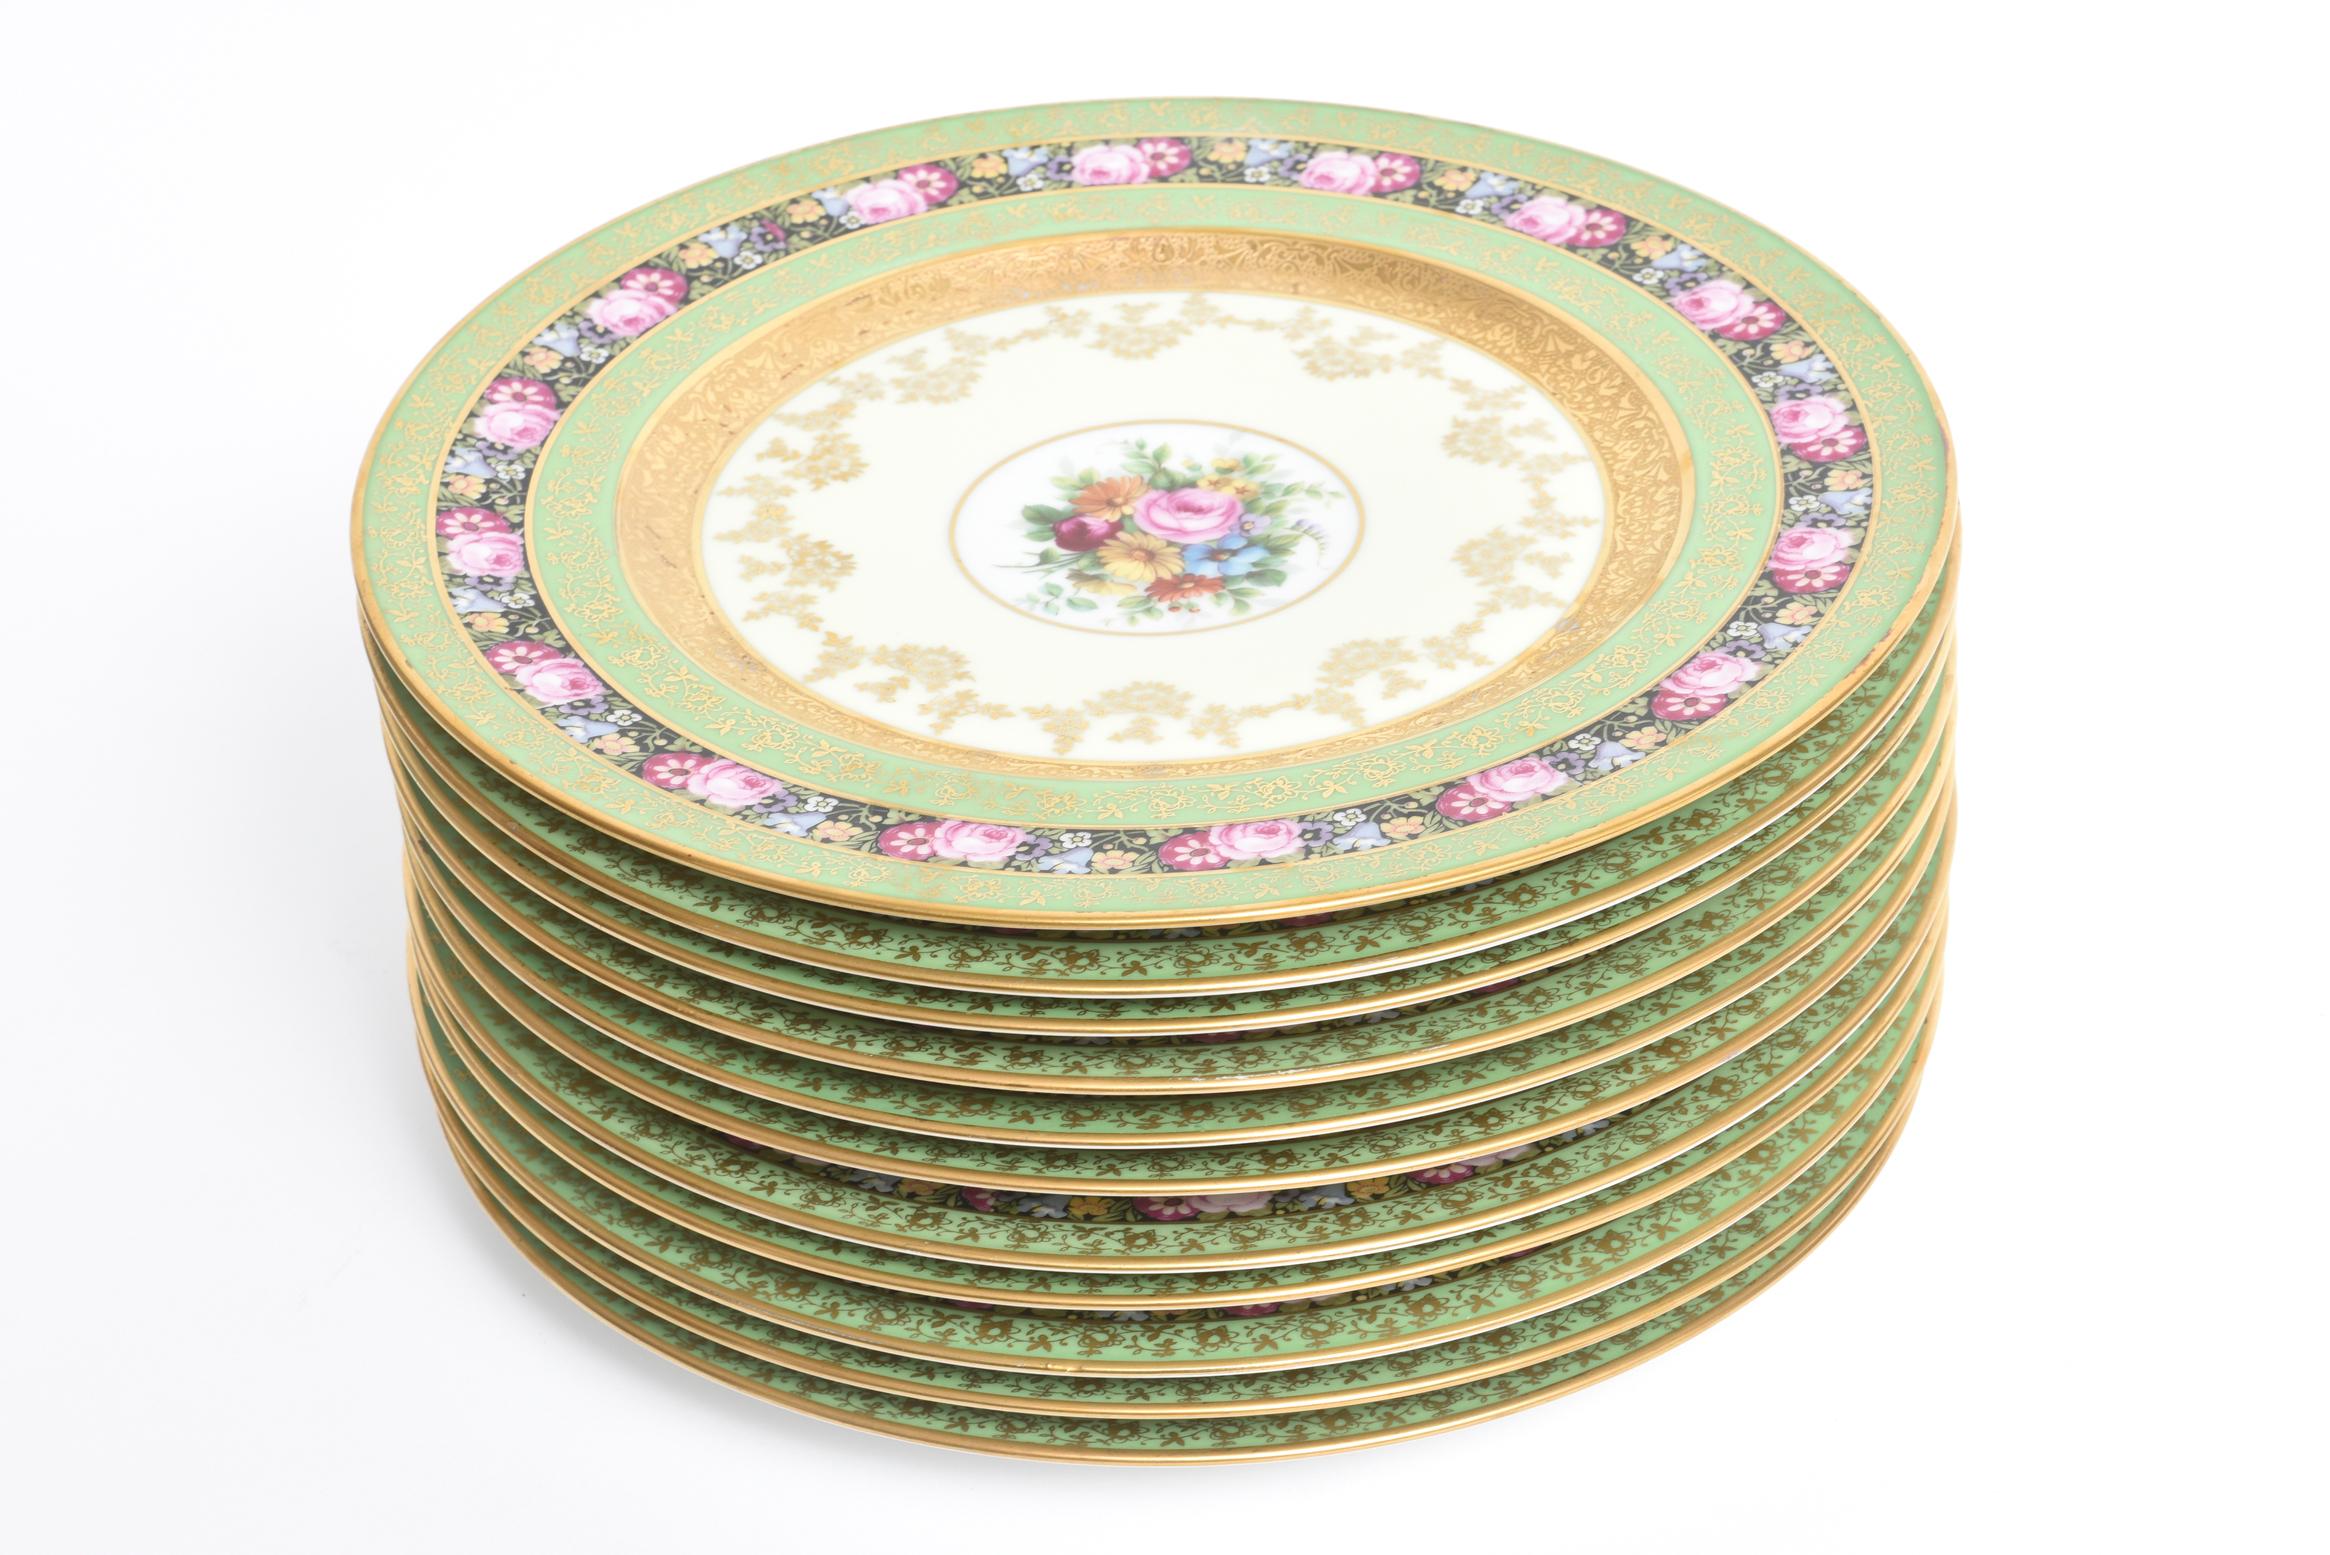 Rare Heinrich & Co. Selb Floral Gold Encrusted Service Cabinet Plates Set of 11 In Good Condition For Sale In Miami Beach, FL